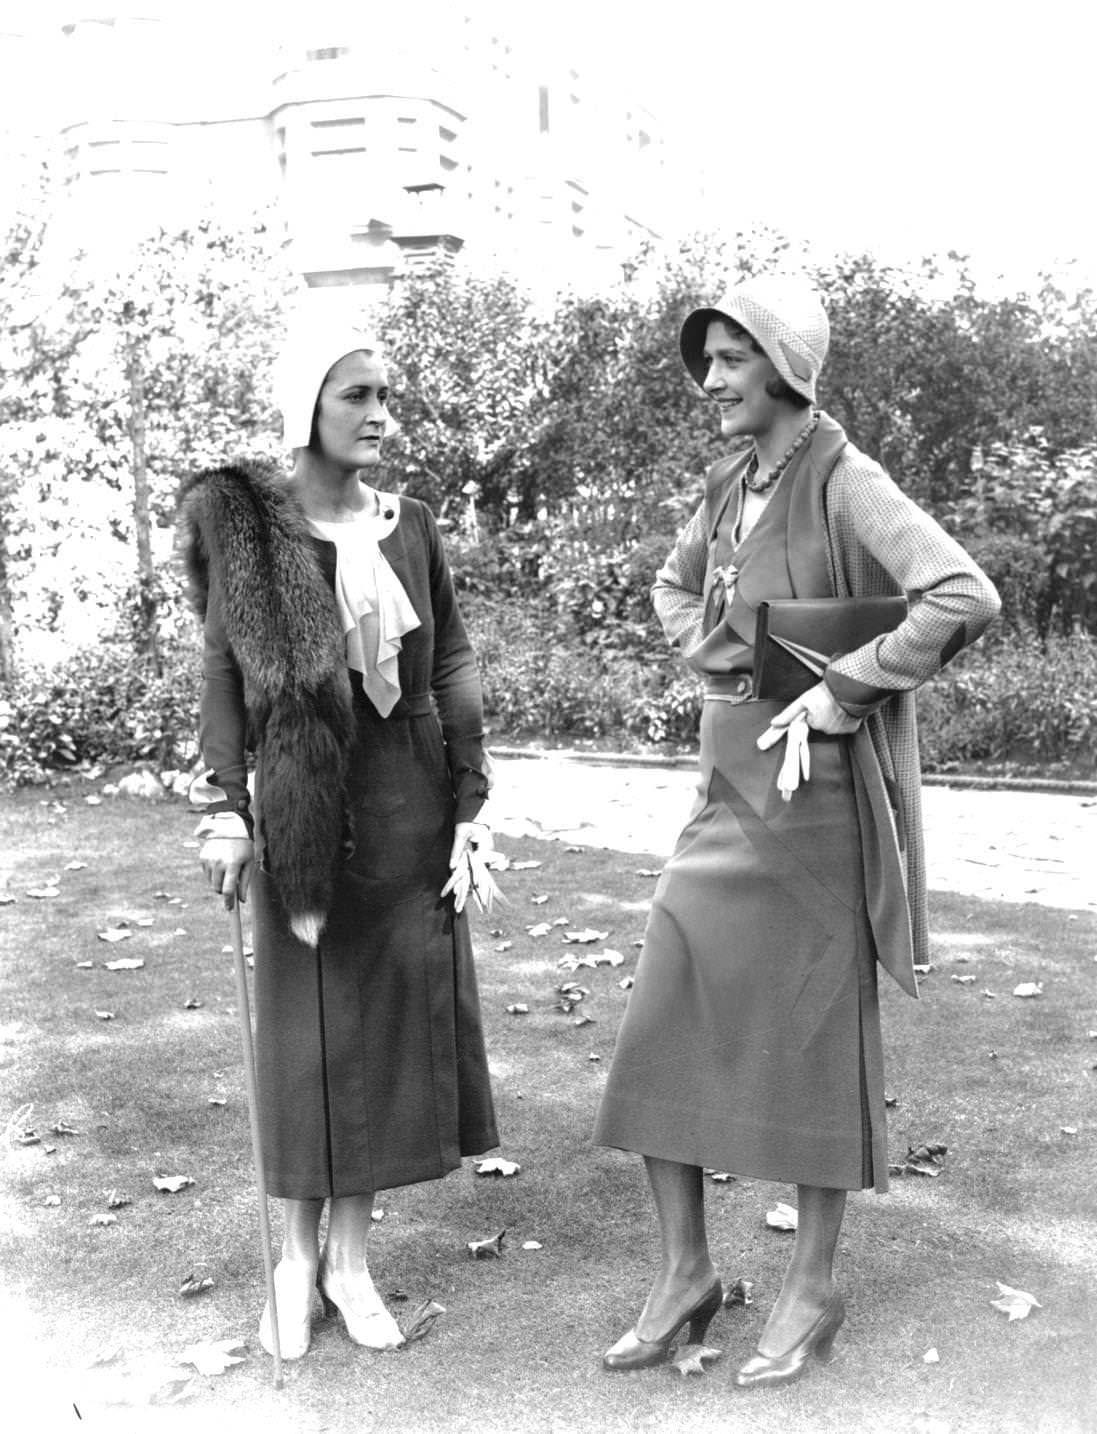 Two women modelling fashionable outfits for Ascot, 1925